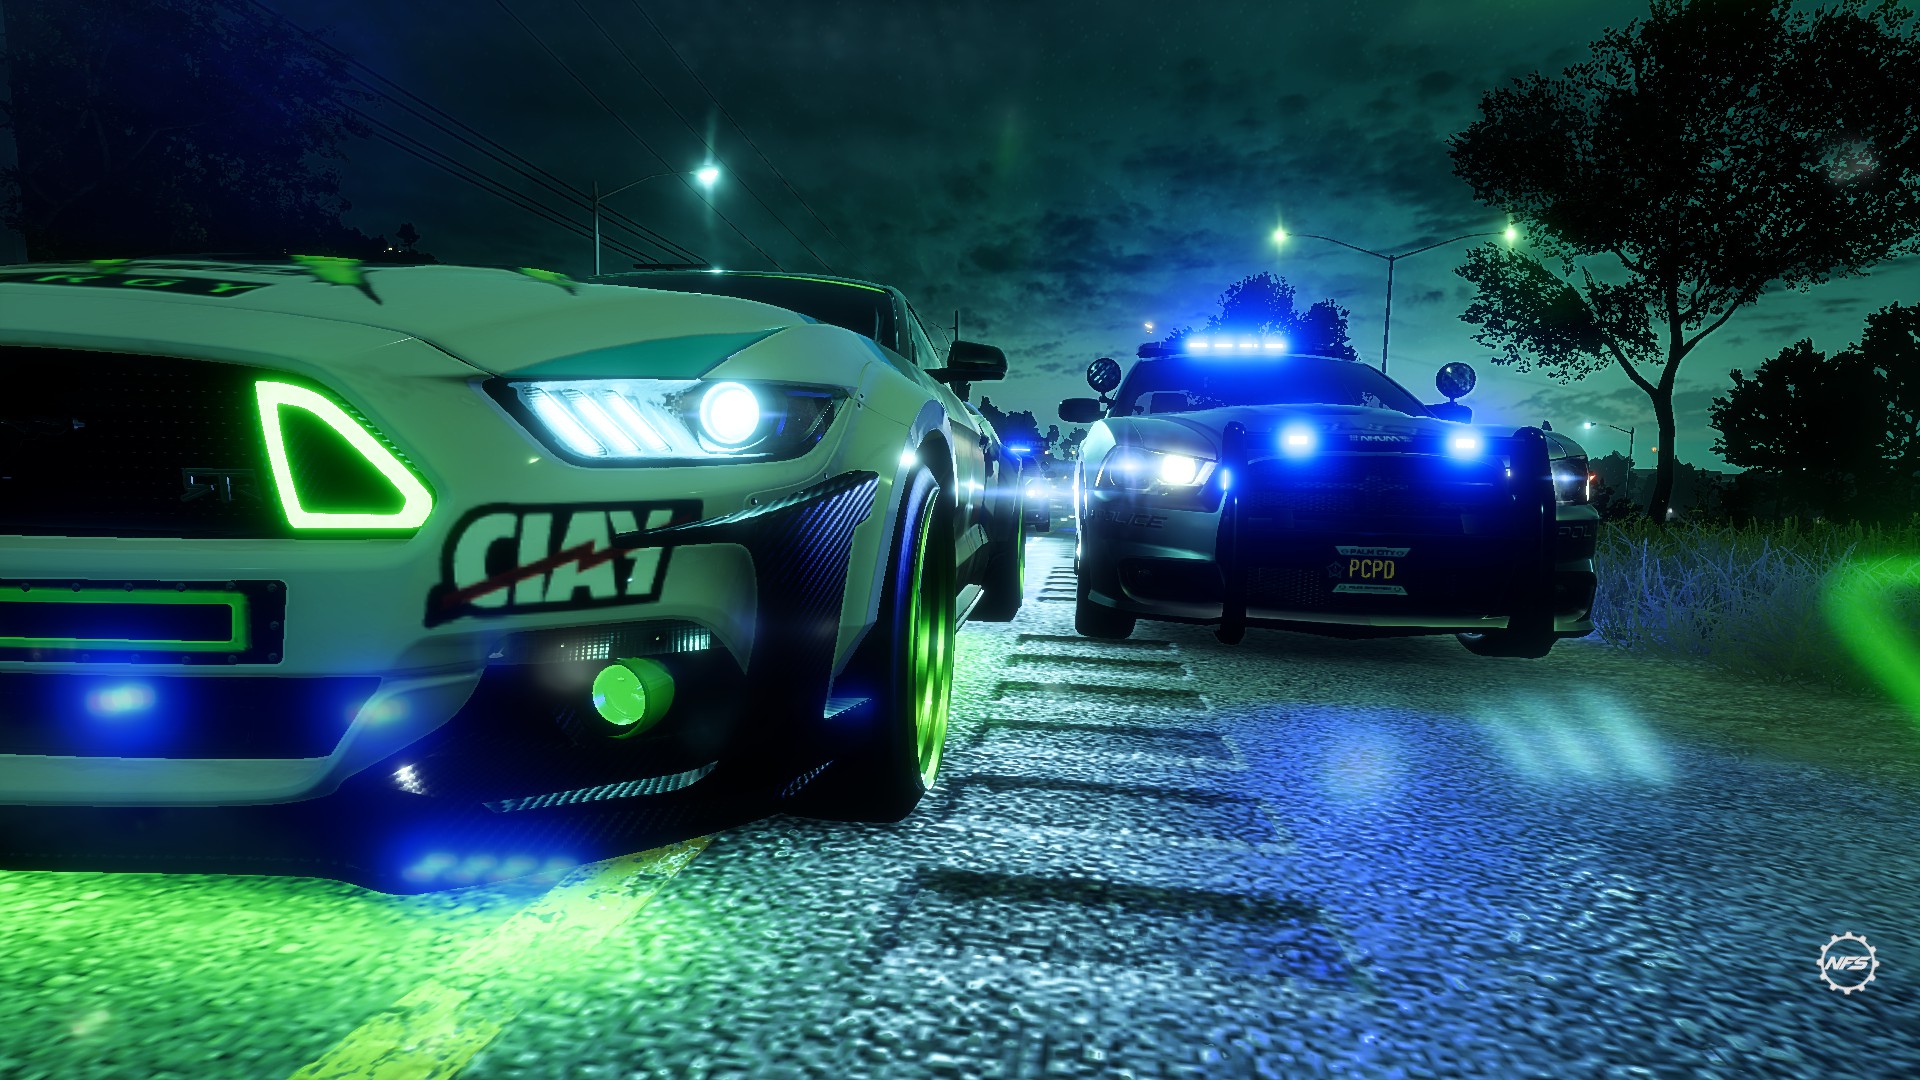 Need For Speed Heat Car Tuning Ford Mustang Police Cars Night Runner 1920x1080